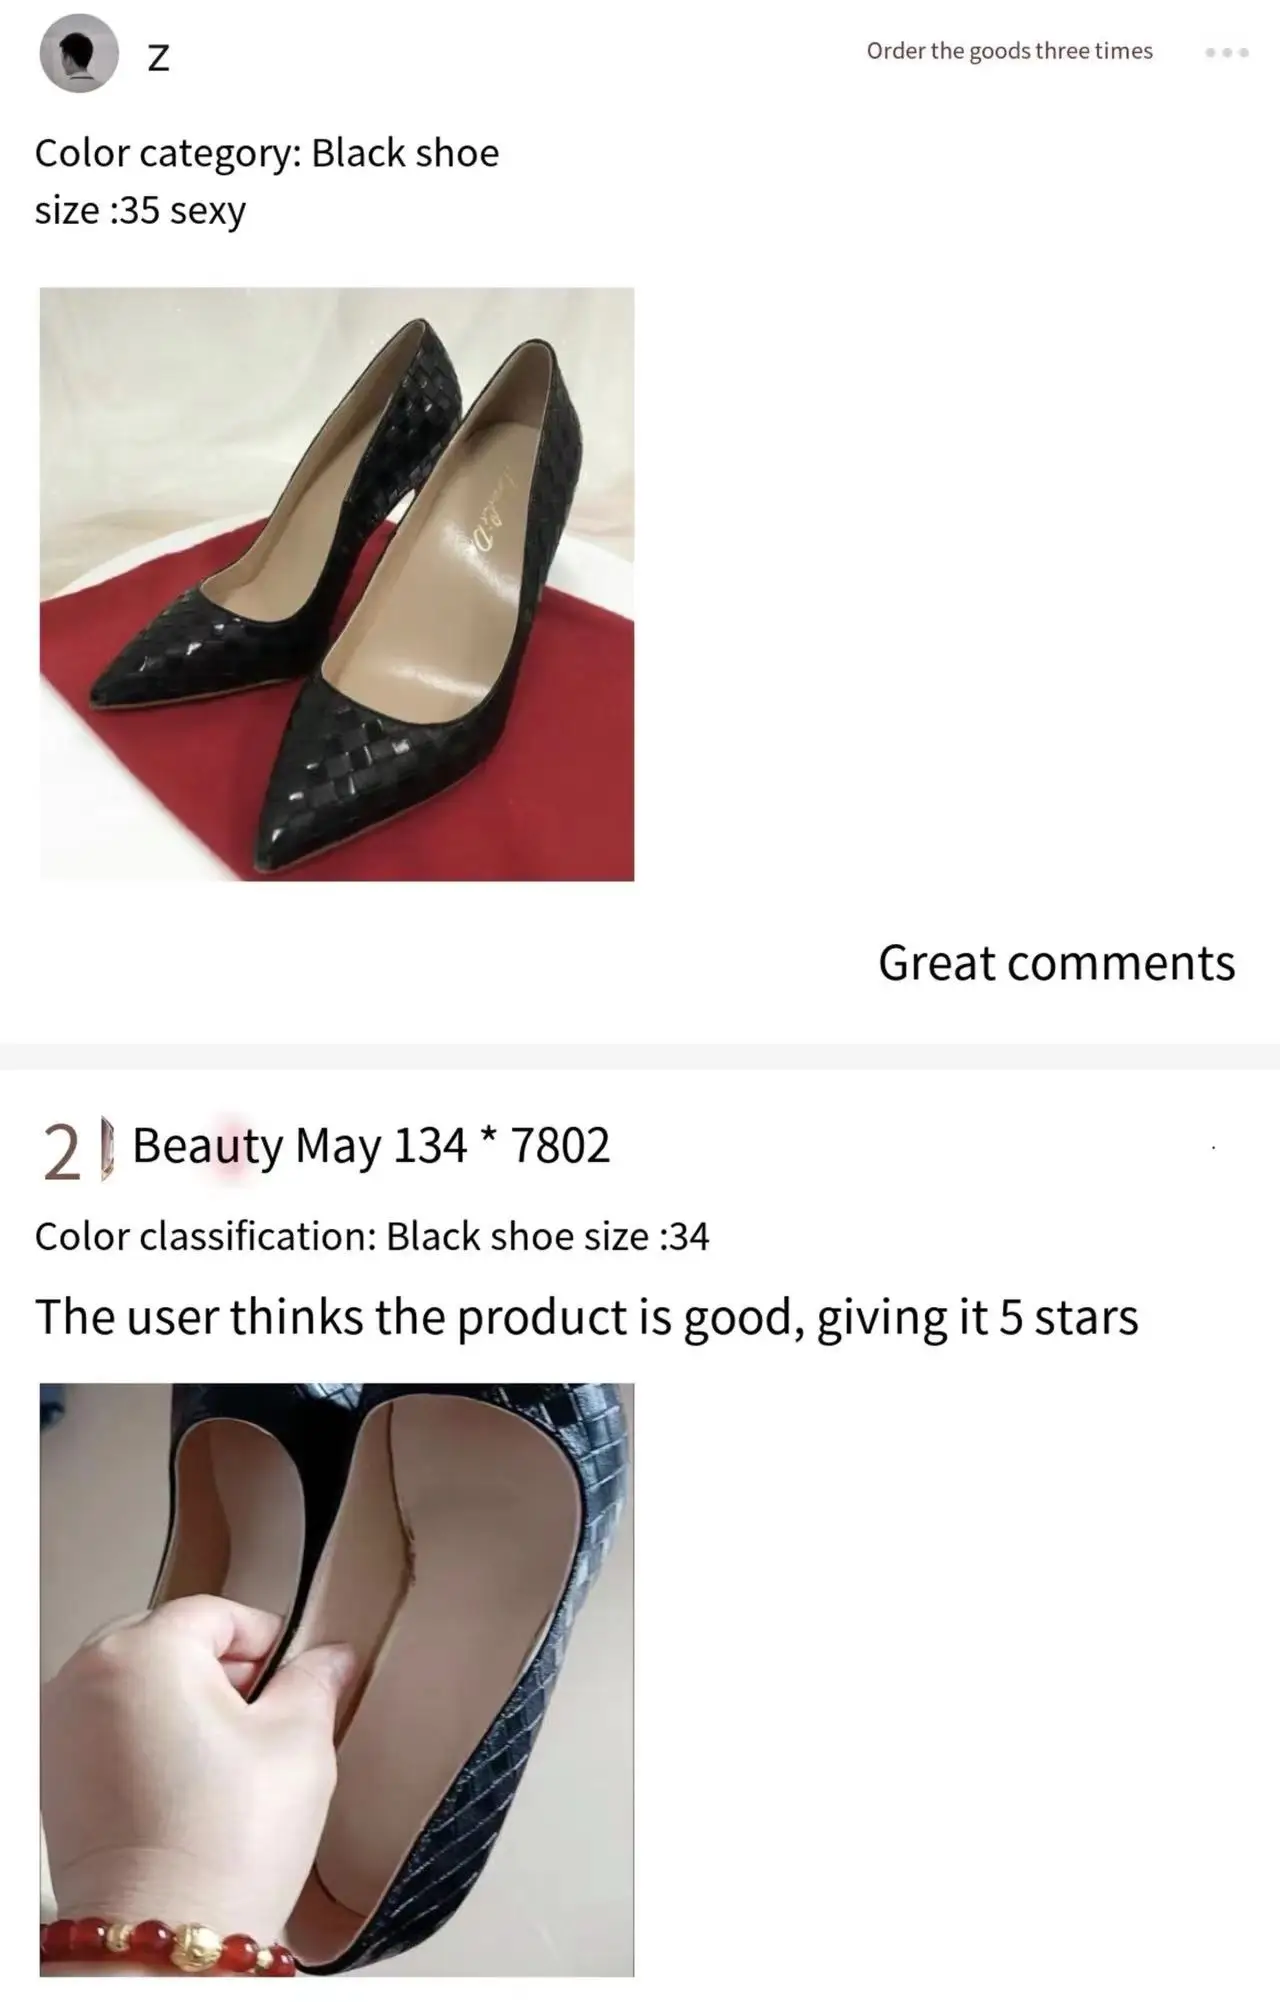 Large Size Sexy Metal Pointed Foot Fashion Patent Leather Thin Heels ...